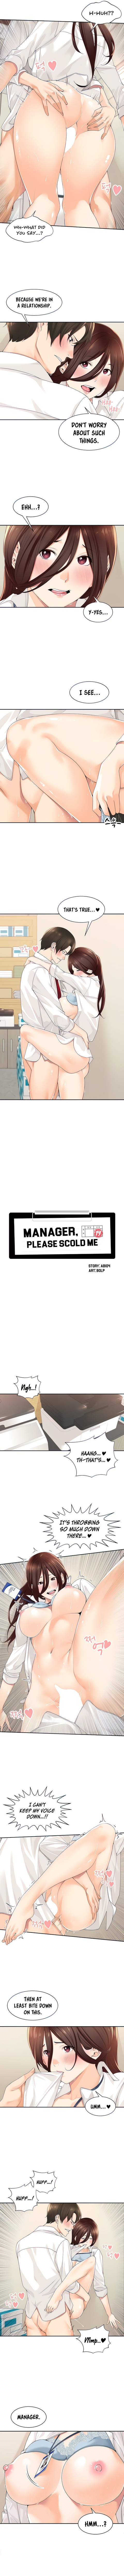 manager-please-scold-me-chap-7-1